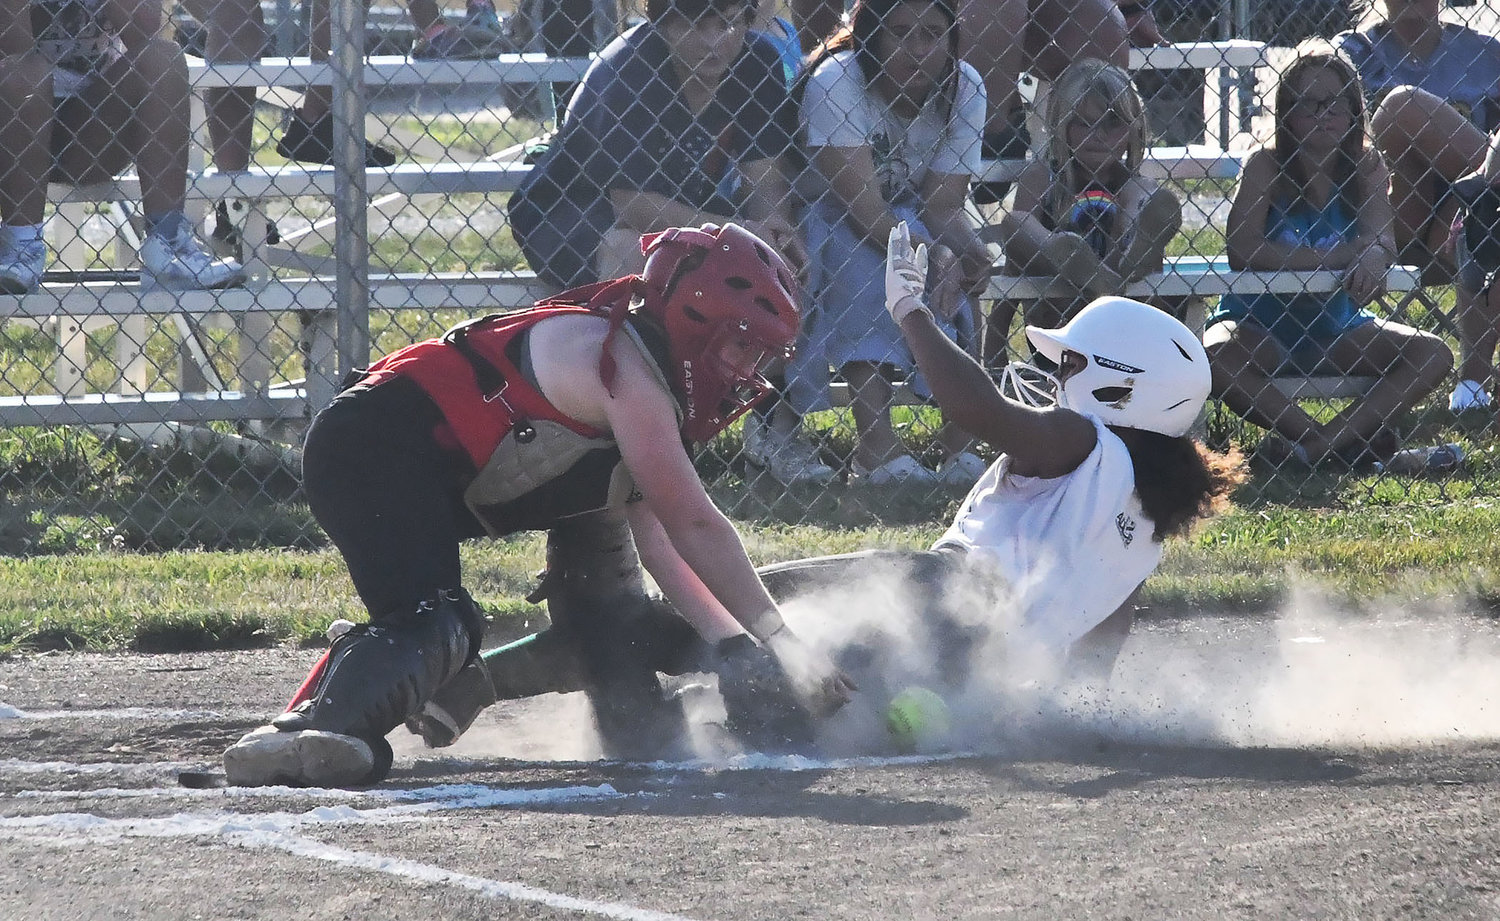 Jaelyn Miller tries to slide into home during the first inning. Miller was called out on the play. Base running is one of the skills players work on, especially during summer scrimmages.